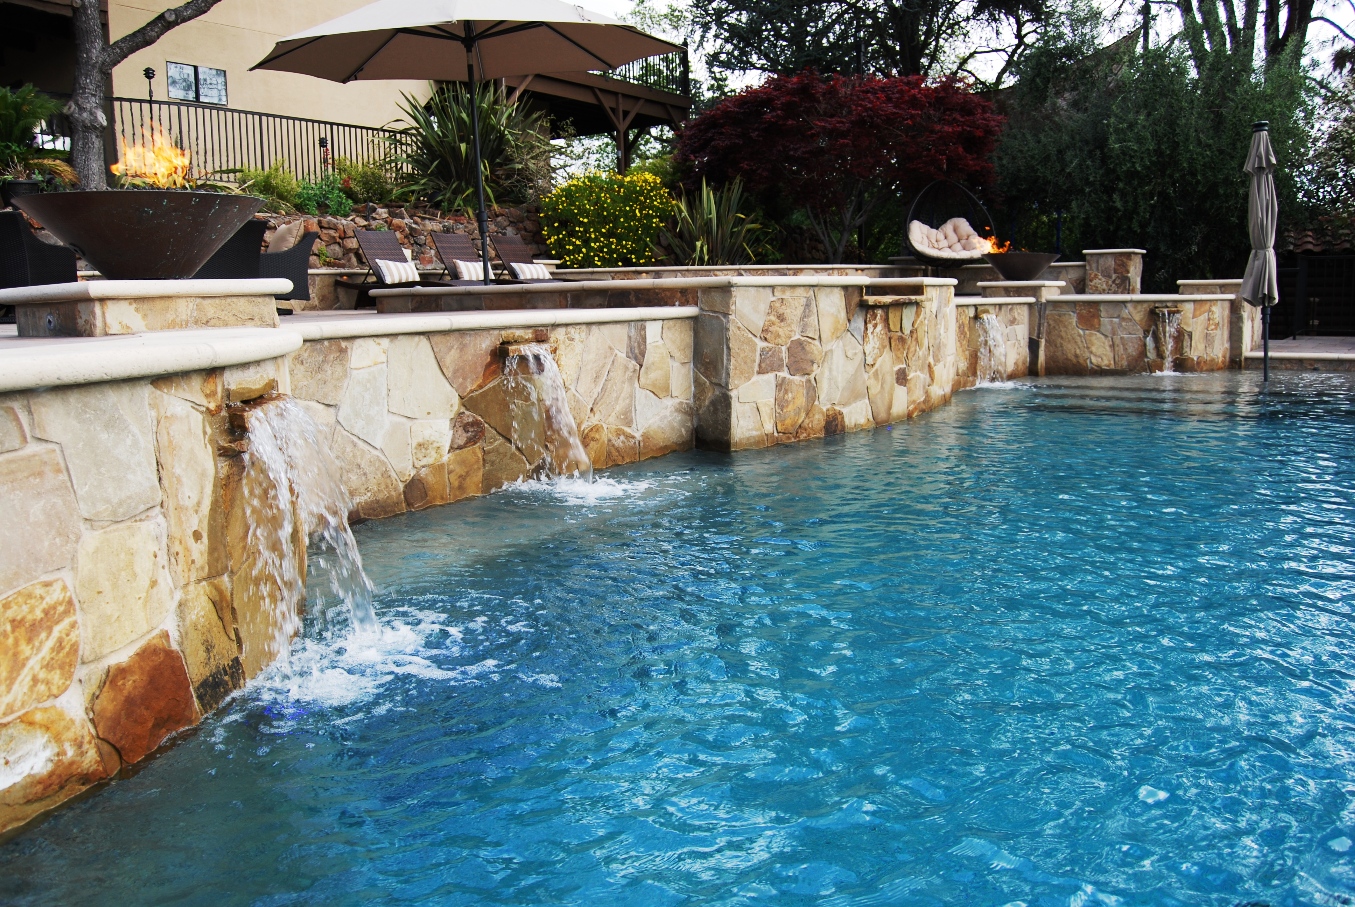 Quality swimming pool design and construction